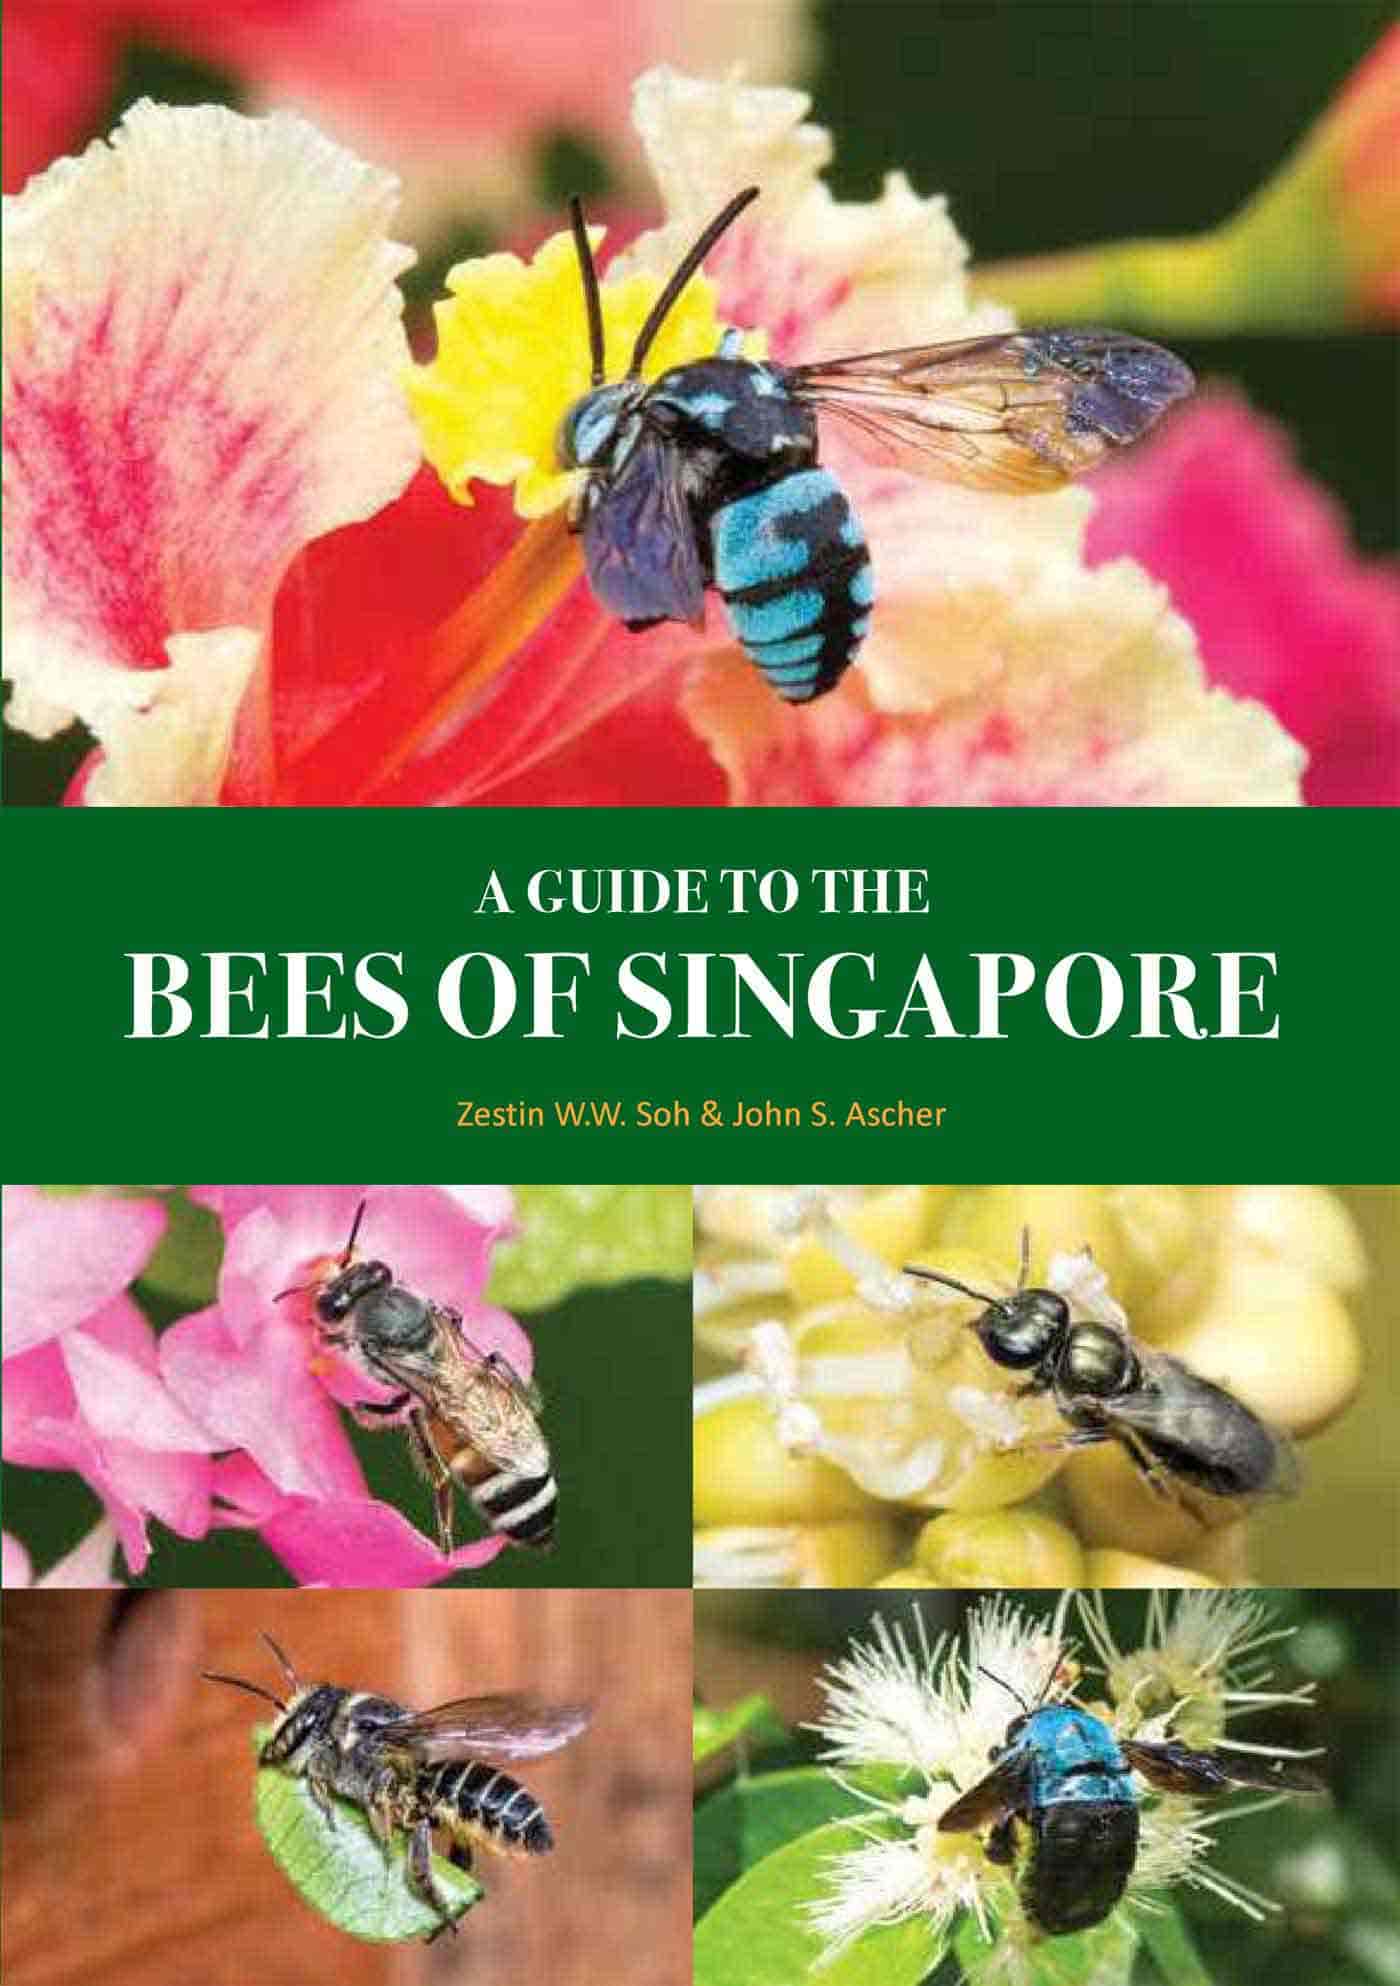 A Guide to the Bees of Singapore